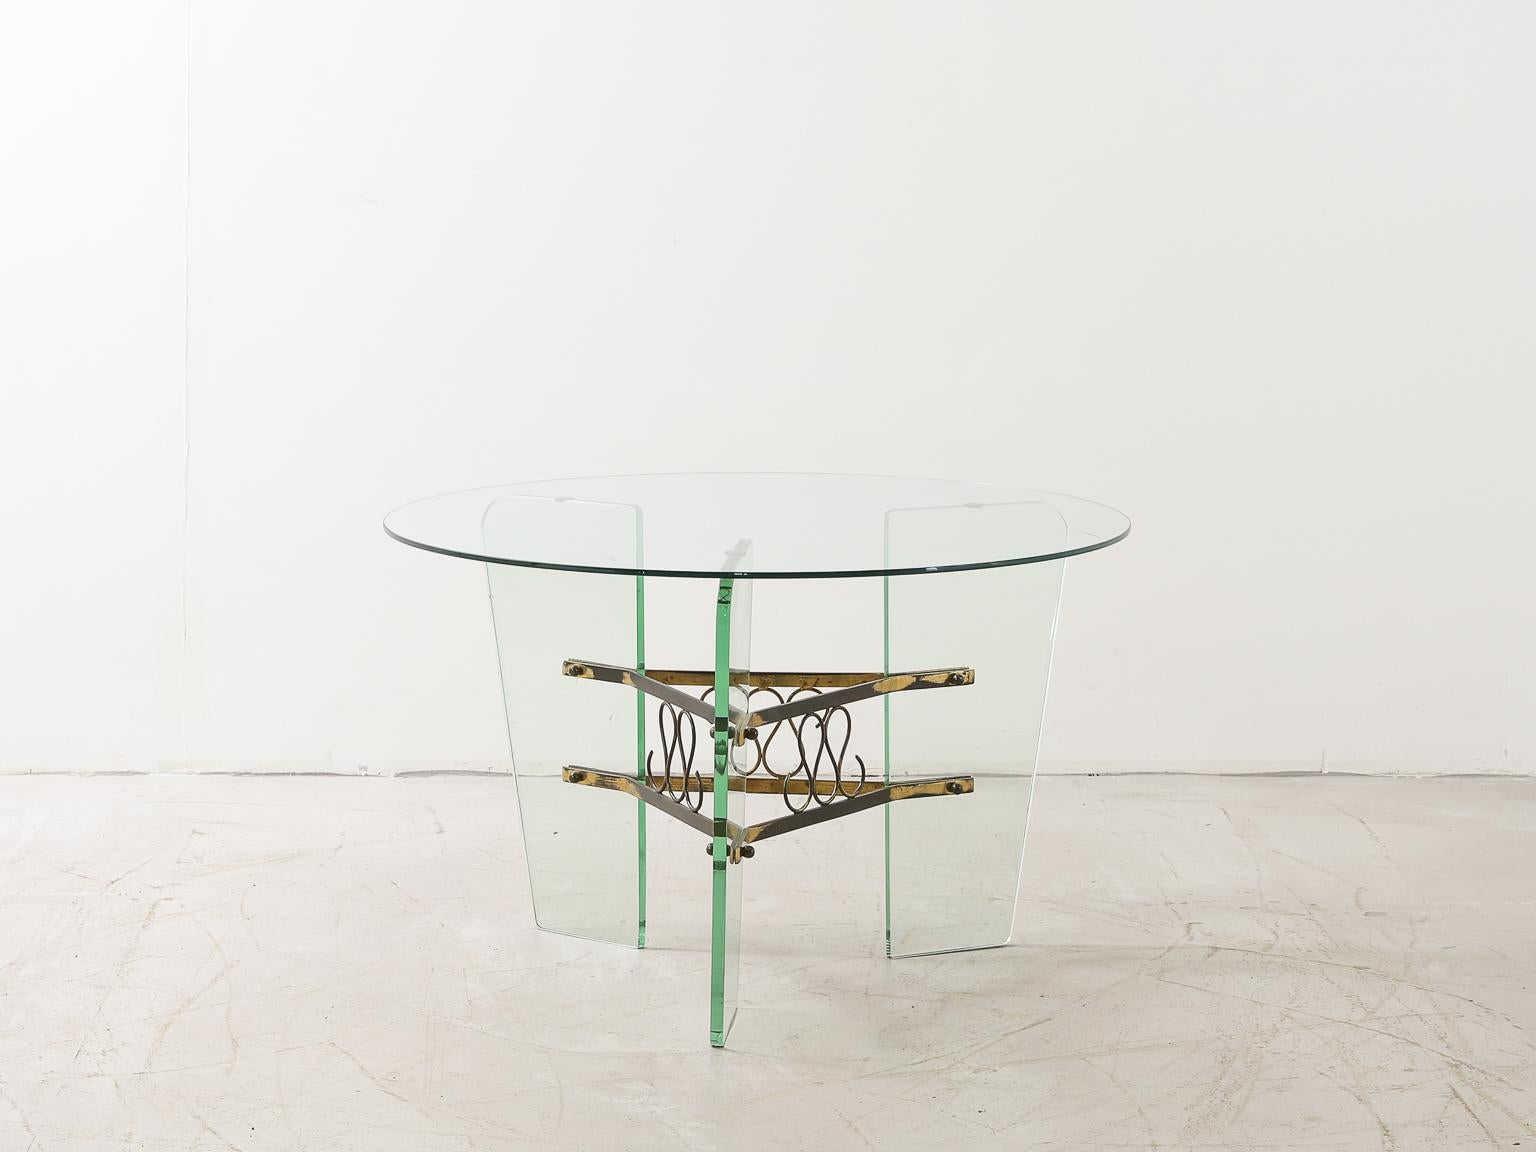 An elegant glass and brass coffee or smoking table by Italian designer Luigi Brusotti, from the 1950s.

With a circular glass top held by three glass legs connected by an ornate, decorative brass element.